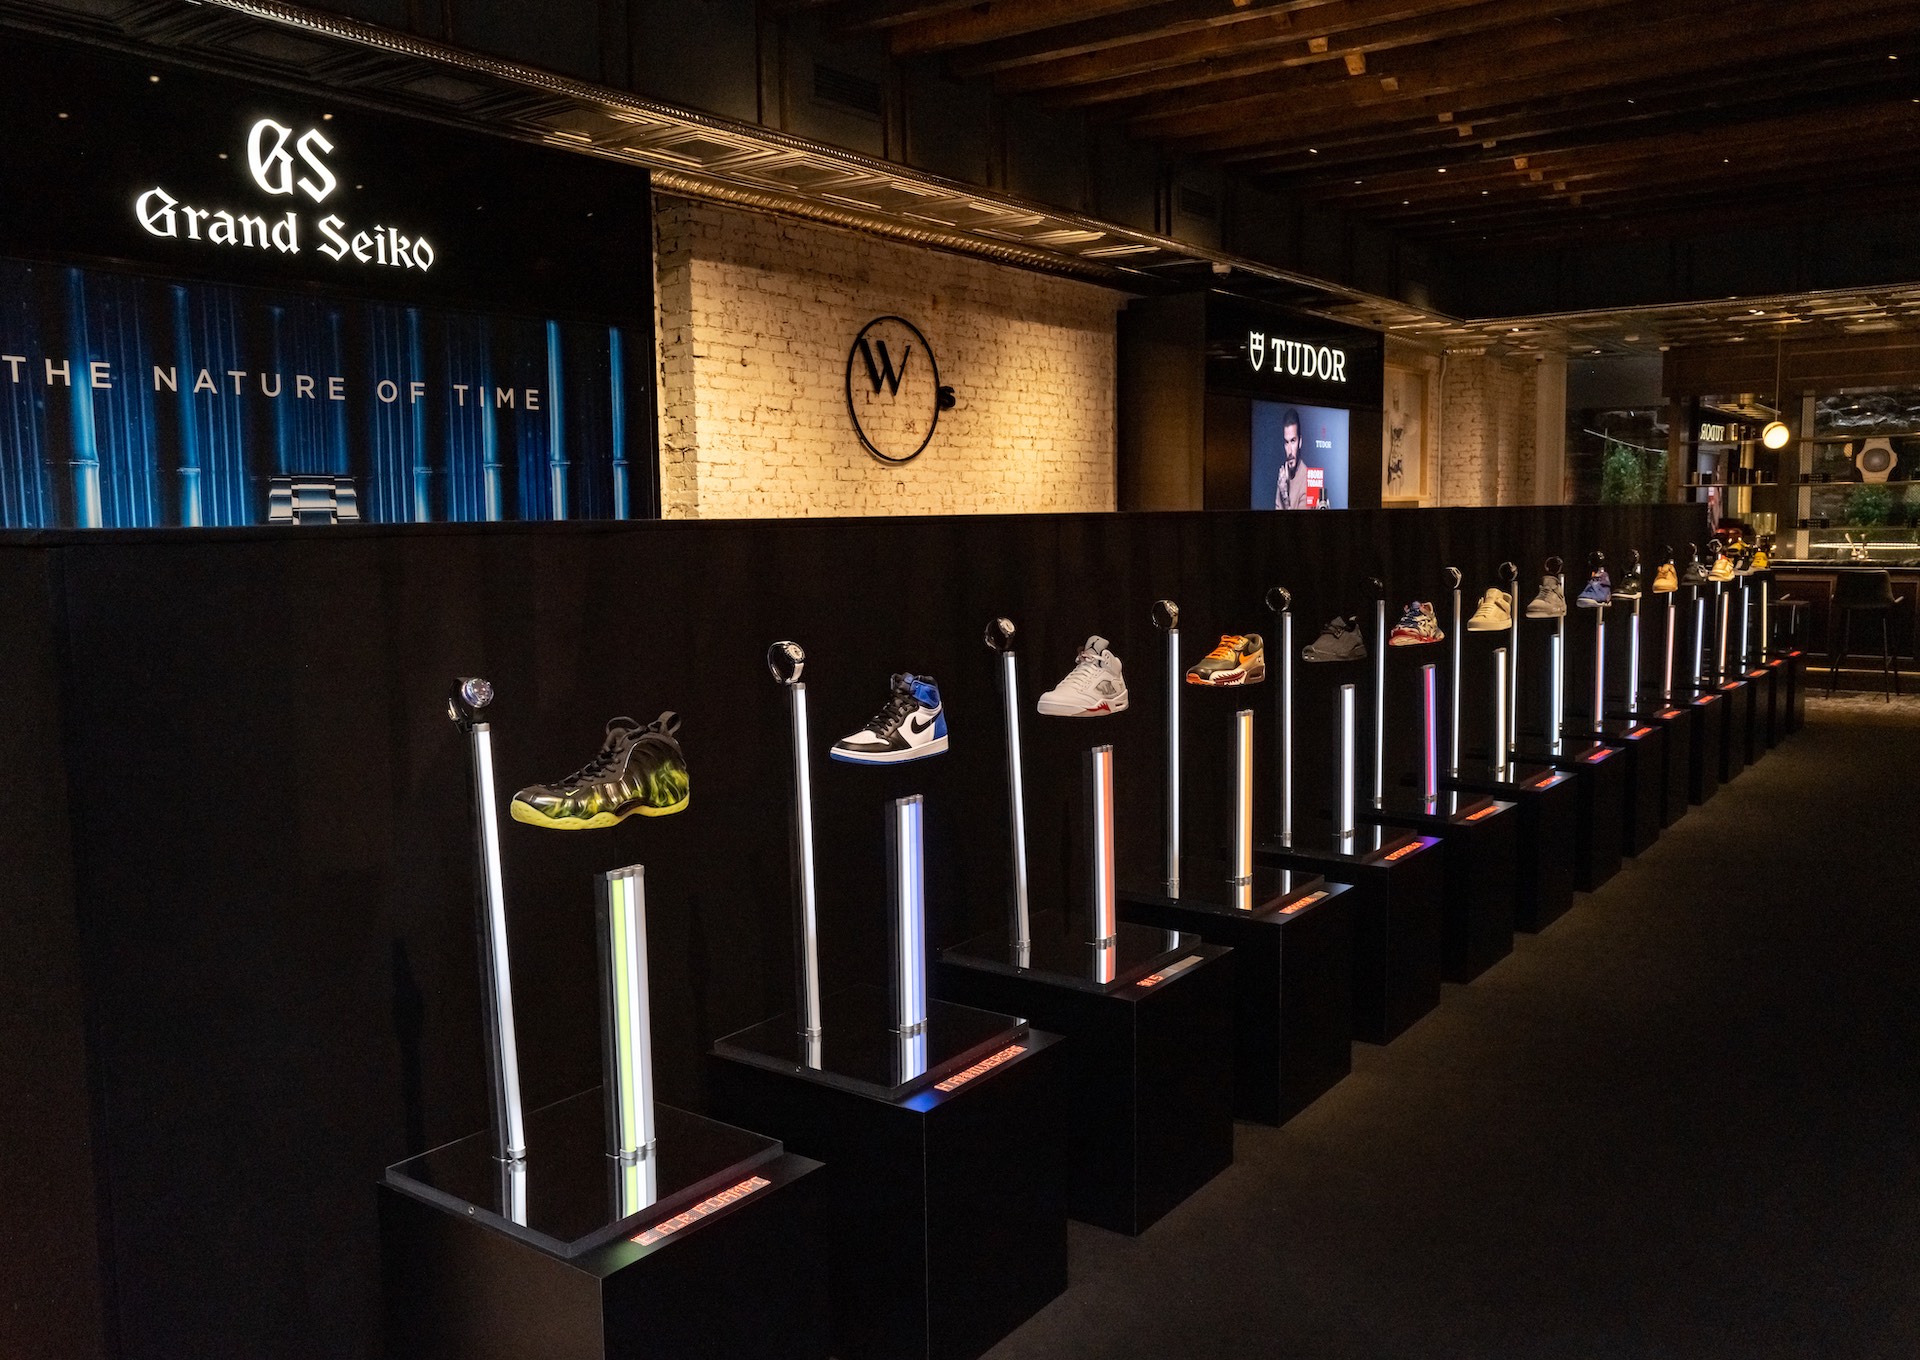 Watches Of Switzerland ‘Sneaker Time’ Exhibit In New York Pairs Watches & Shoes (Now-December 2nd)